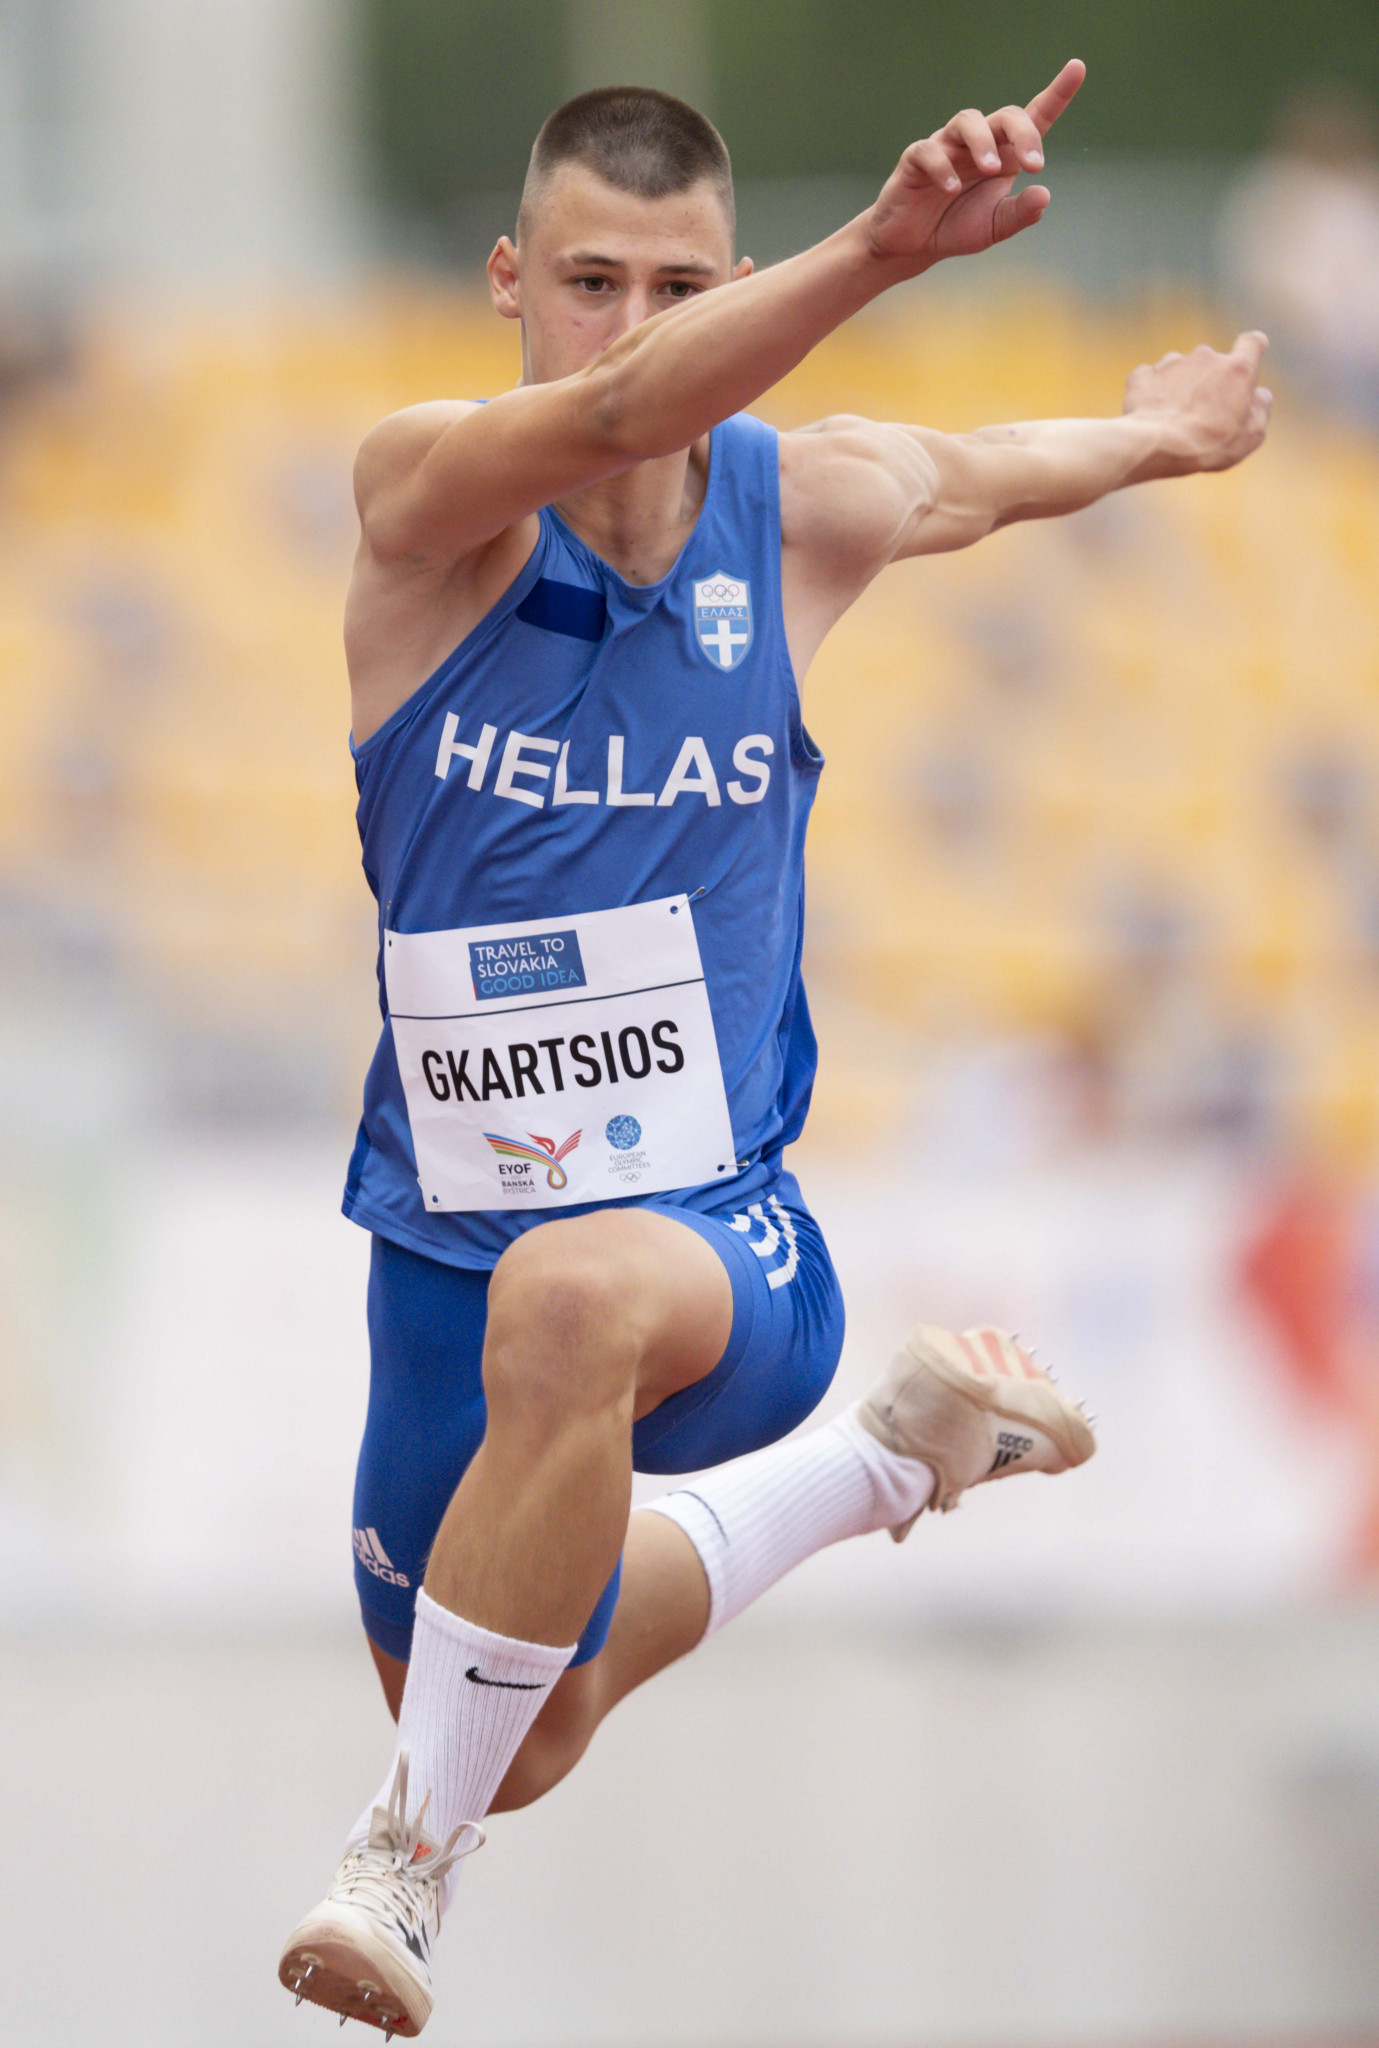 Ioannis Gkartsios of Greece was 0.53m clear as he won the boys' triple jump final with a score of 15.19m ©EYOF Banská Bystrica 2022